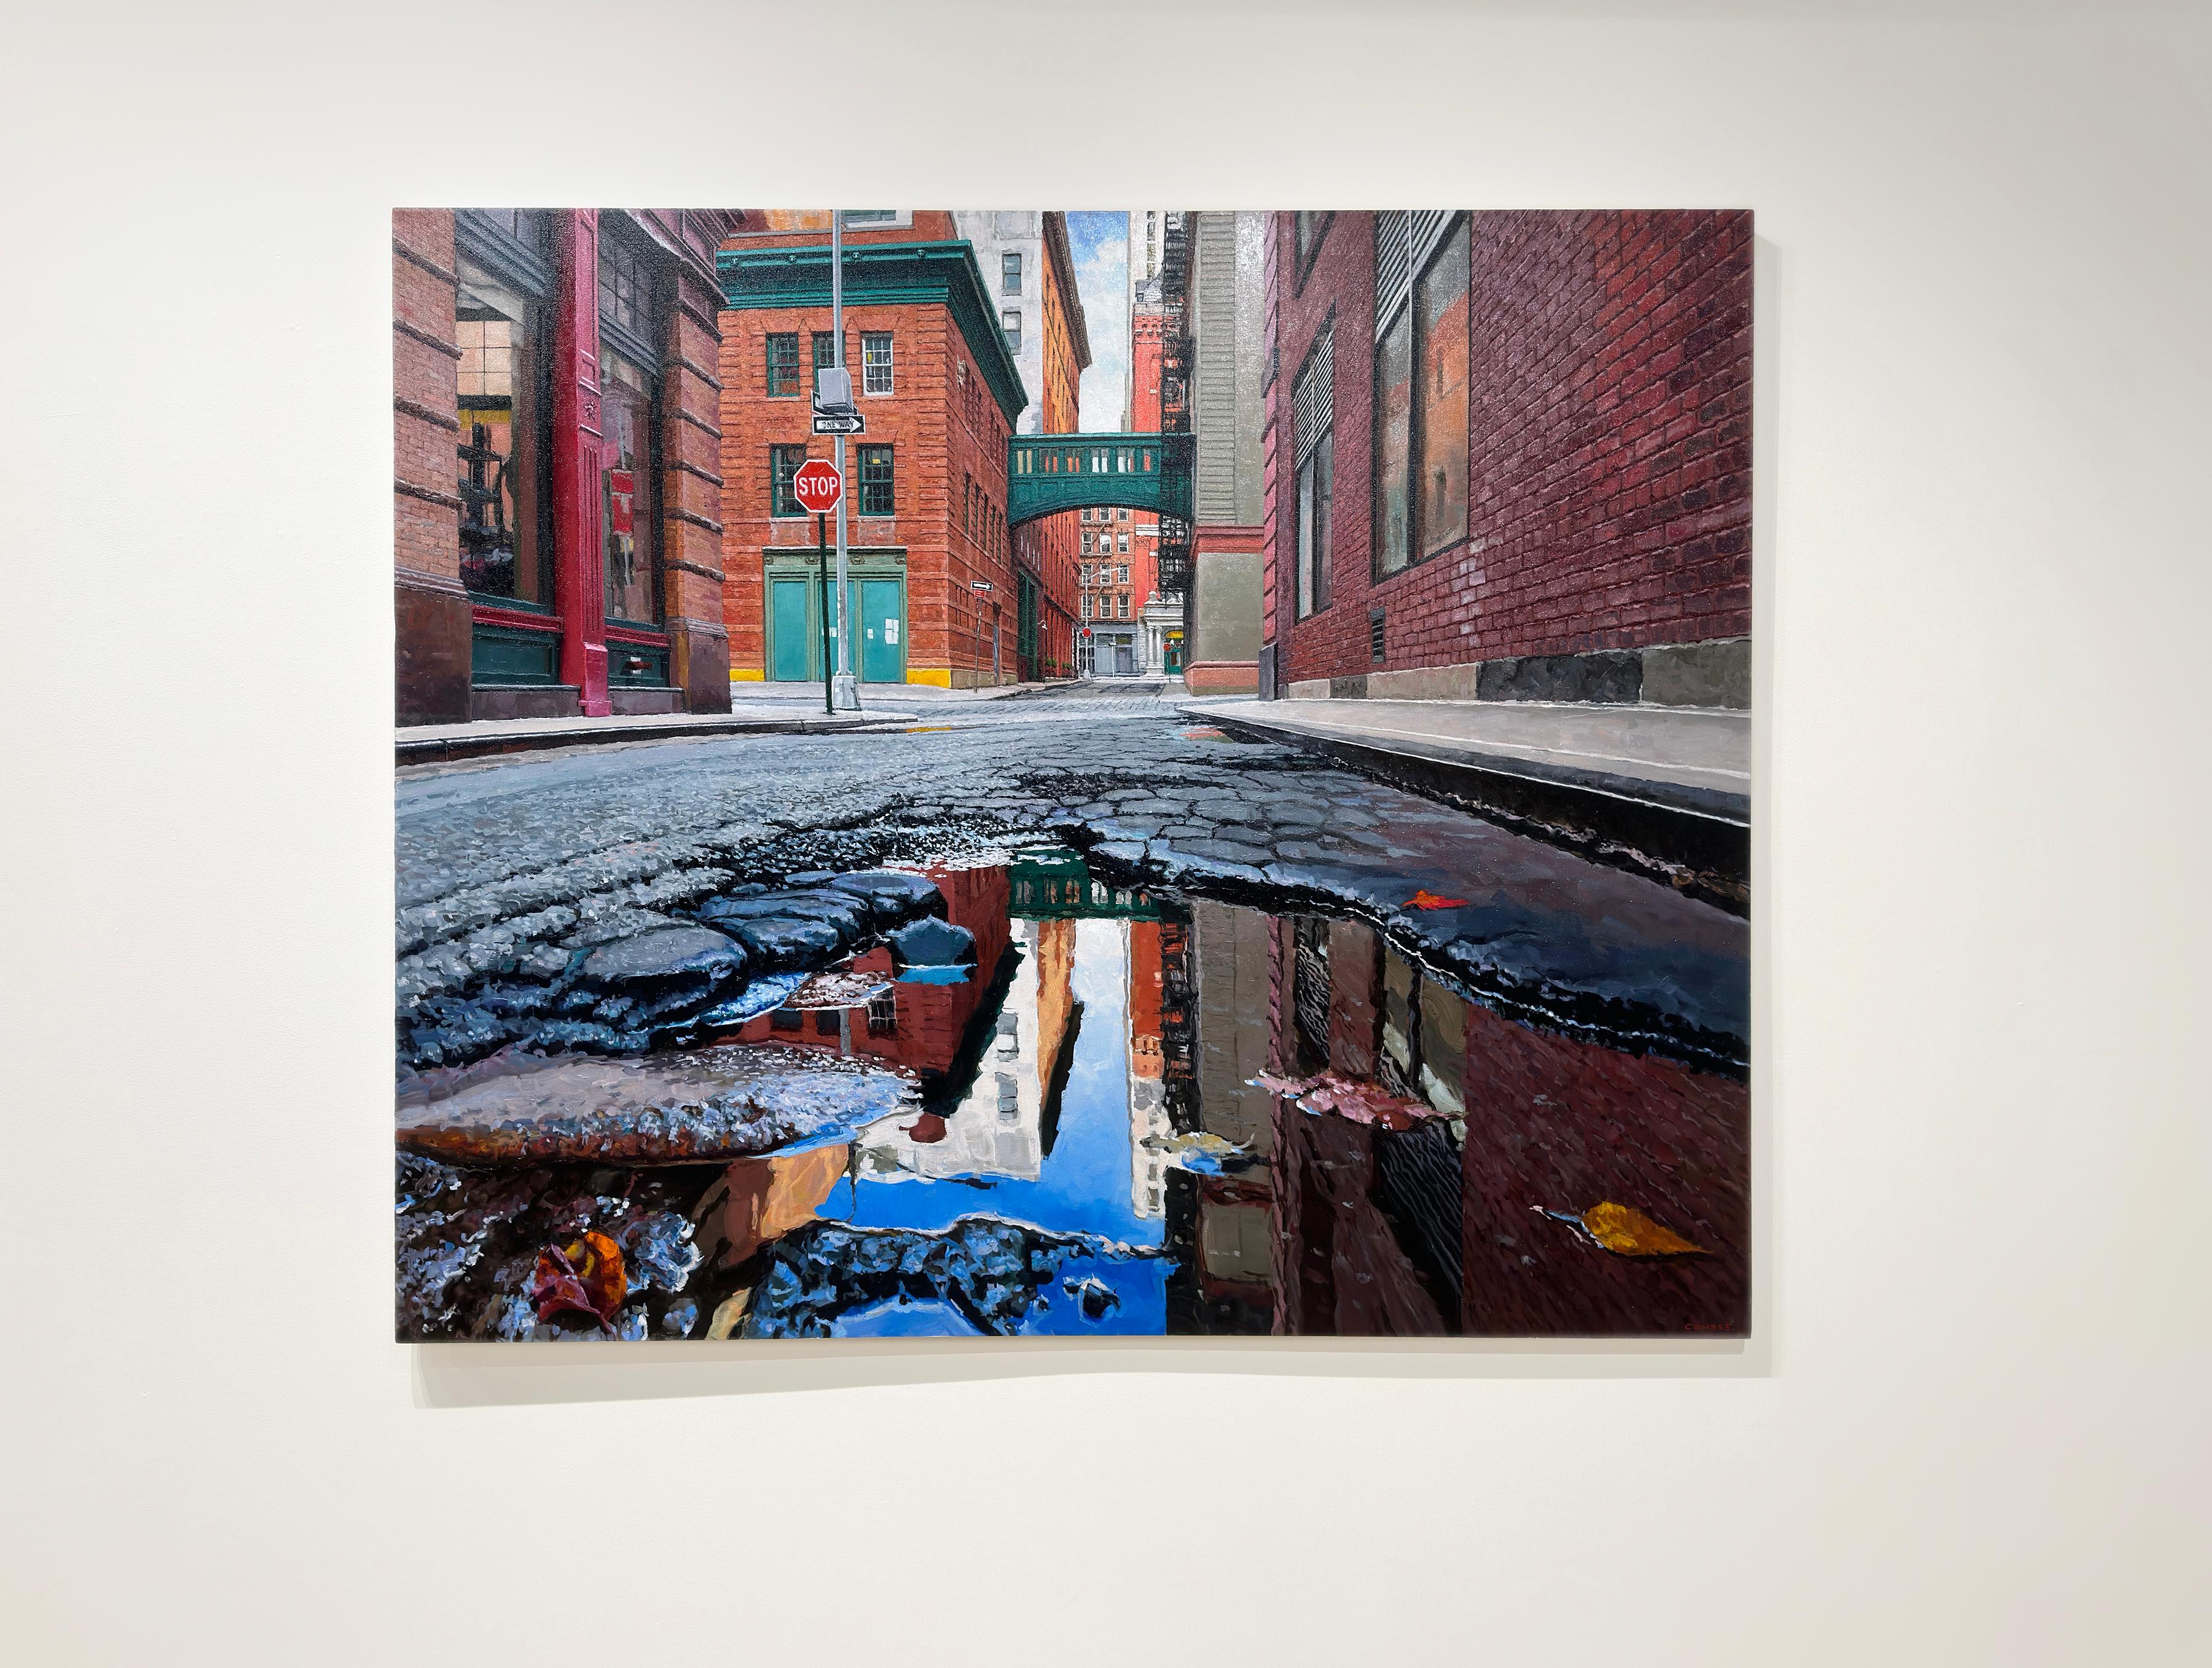 THE DESERTED STREET - Contemporary Cityscape / Realism / New York City  - Painting by Richard Combes